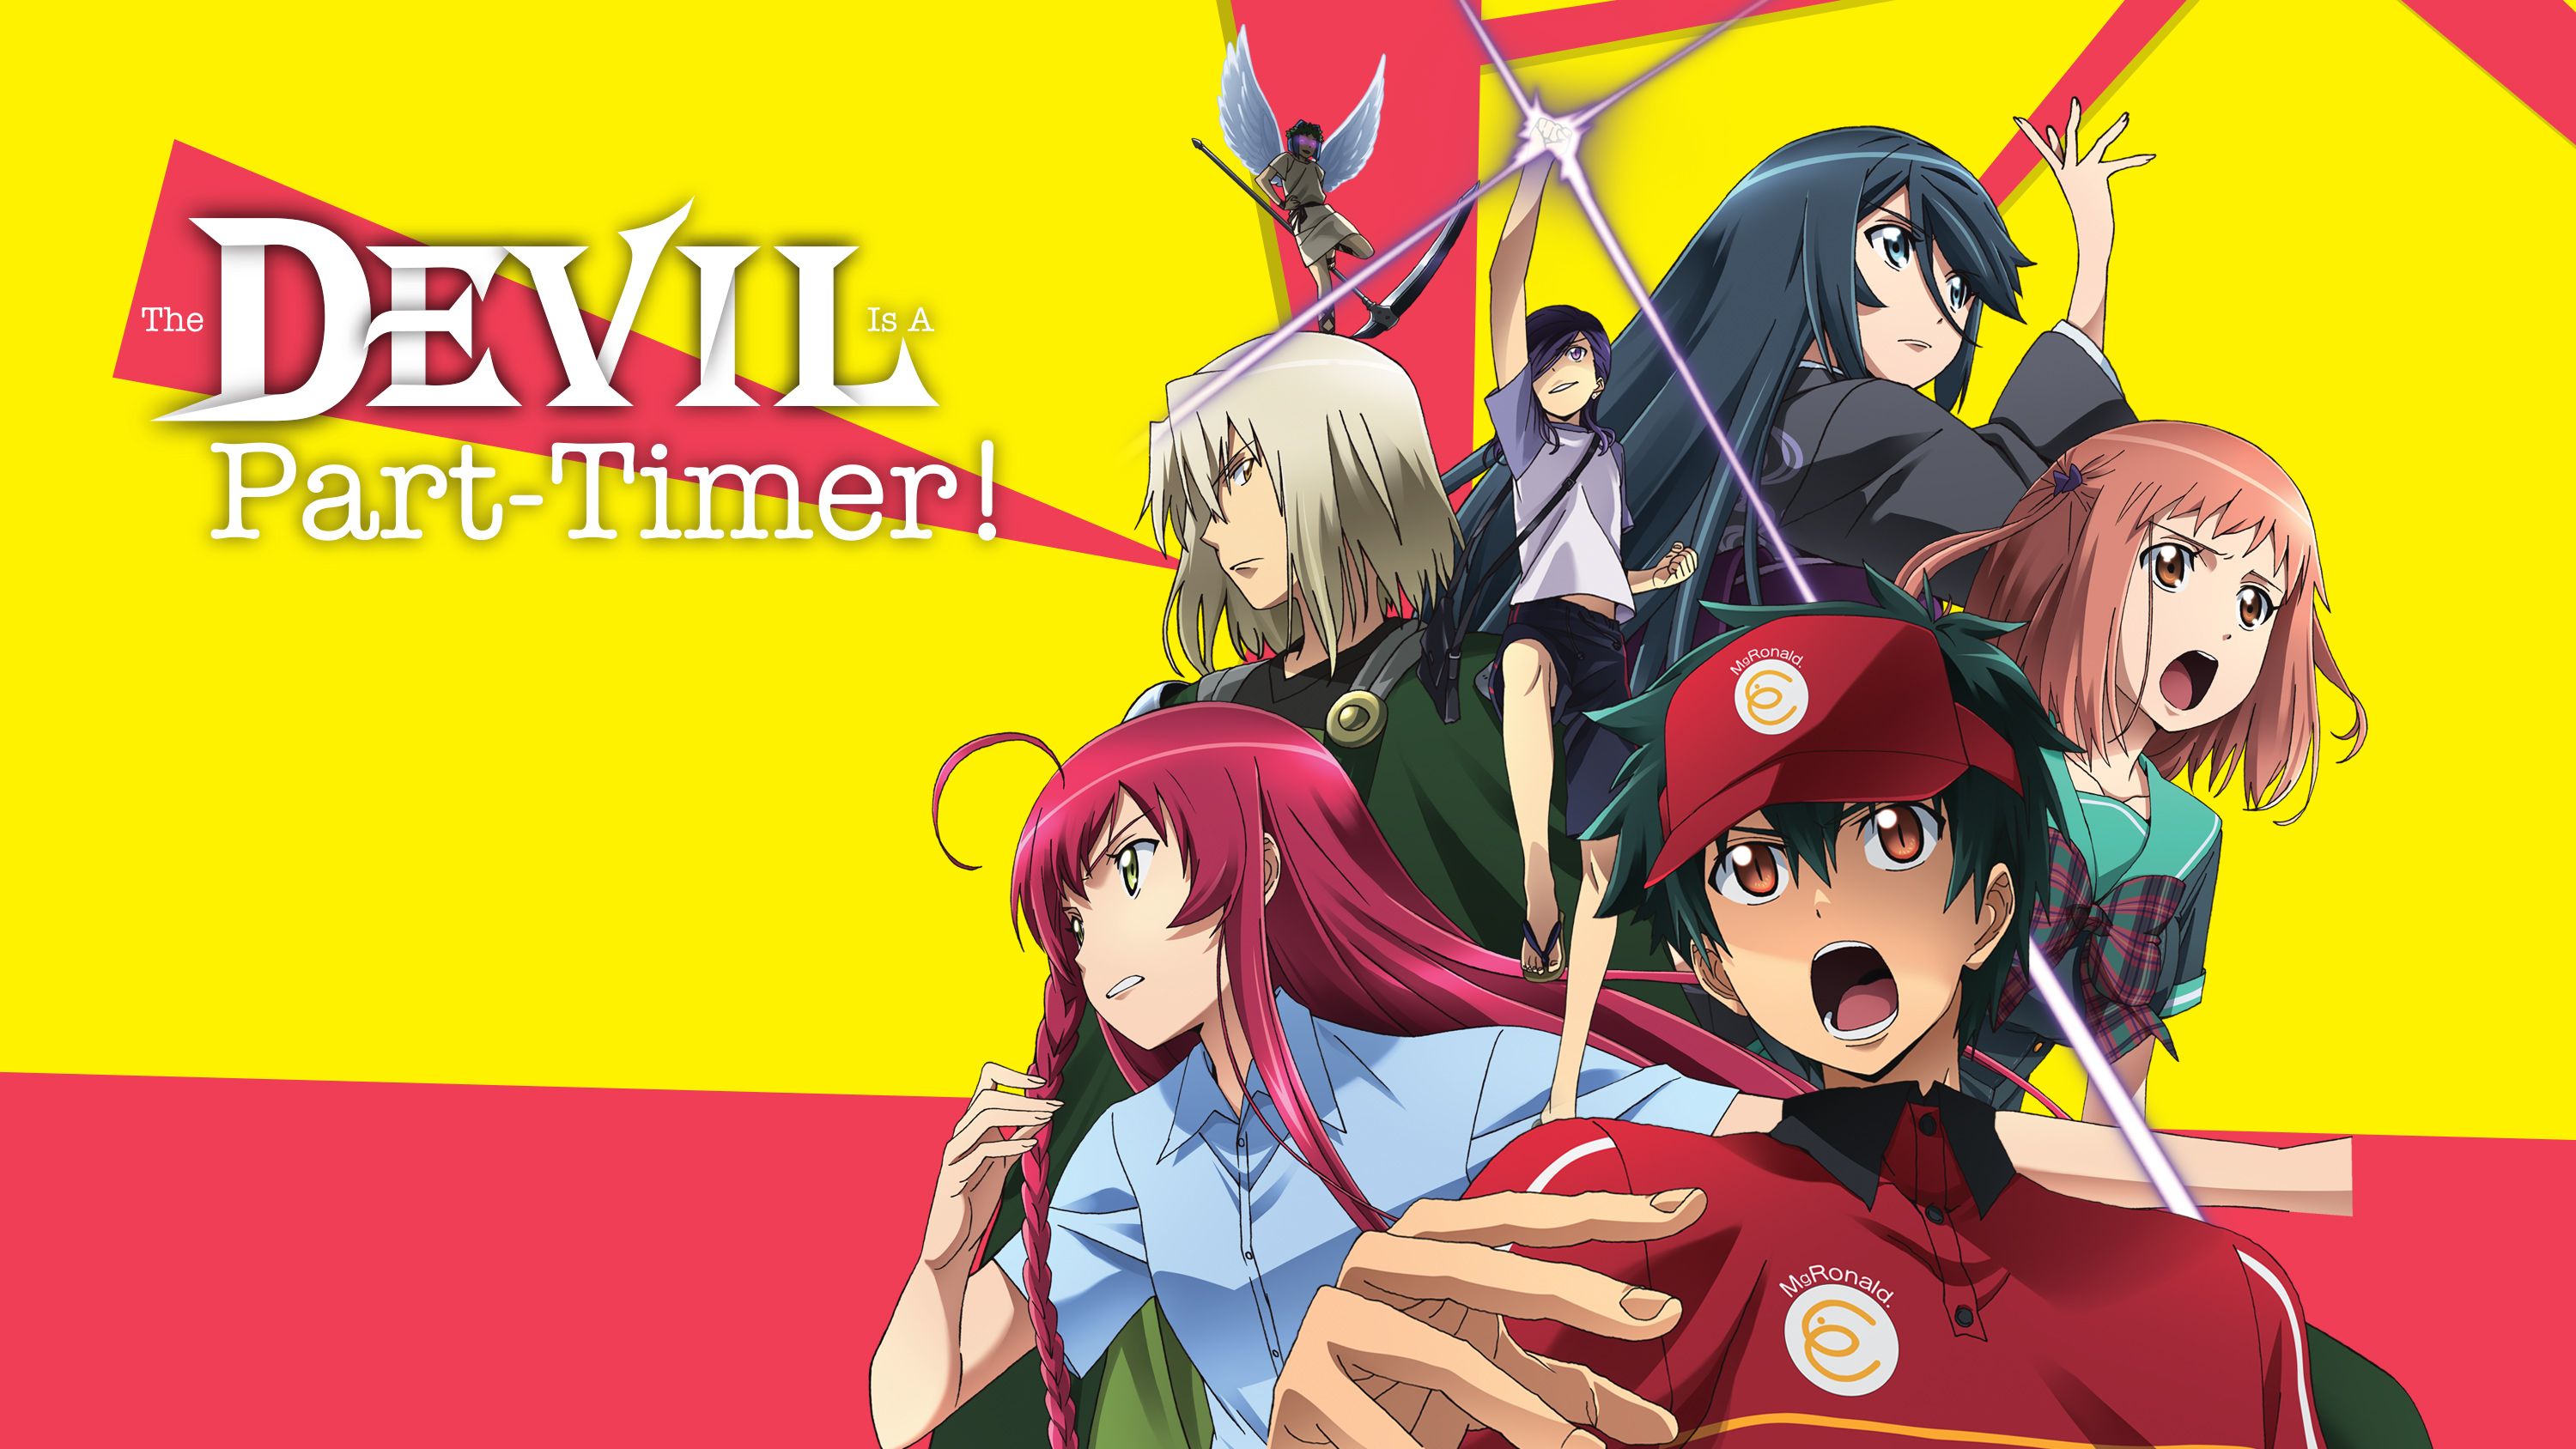 Watch The Devil Is A Part Timer! Sub & Dub. Comedy, Romance Anime